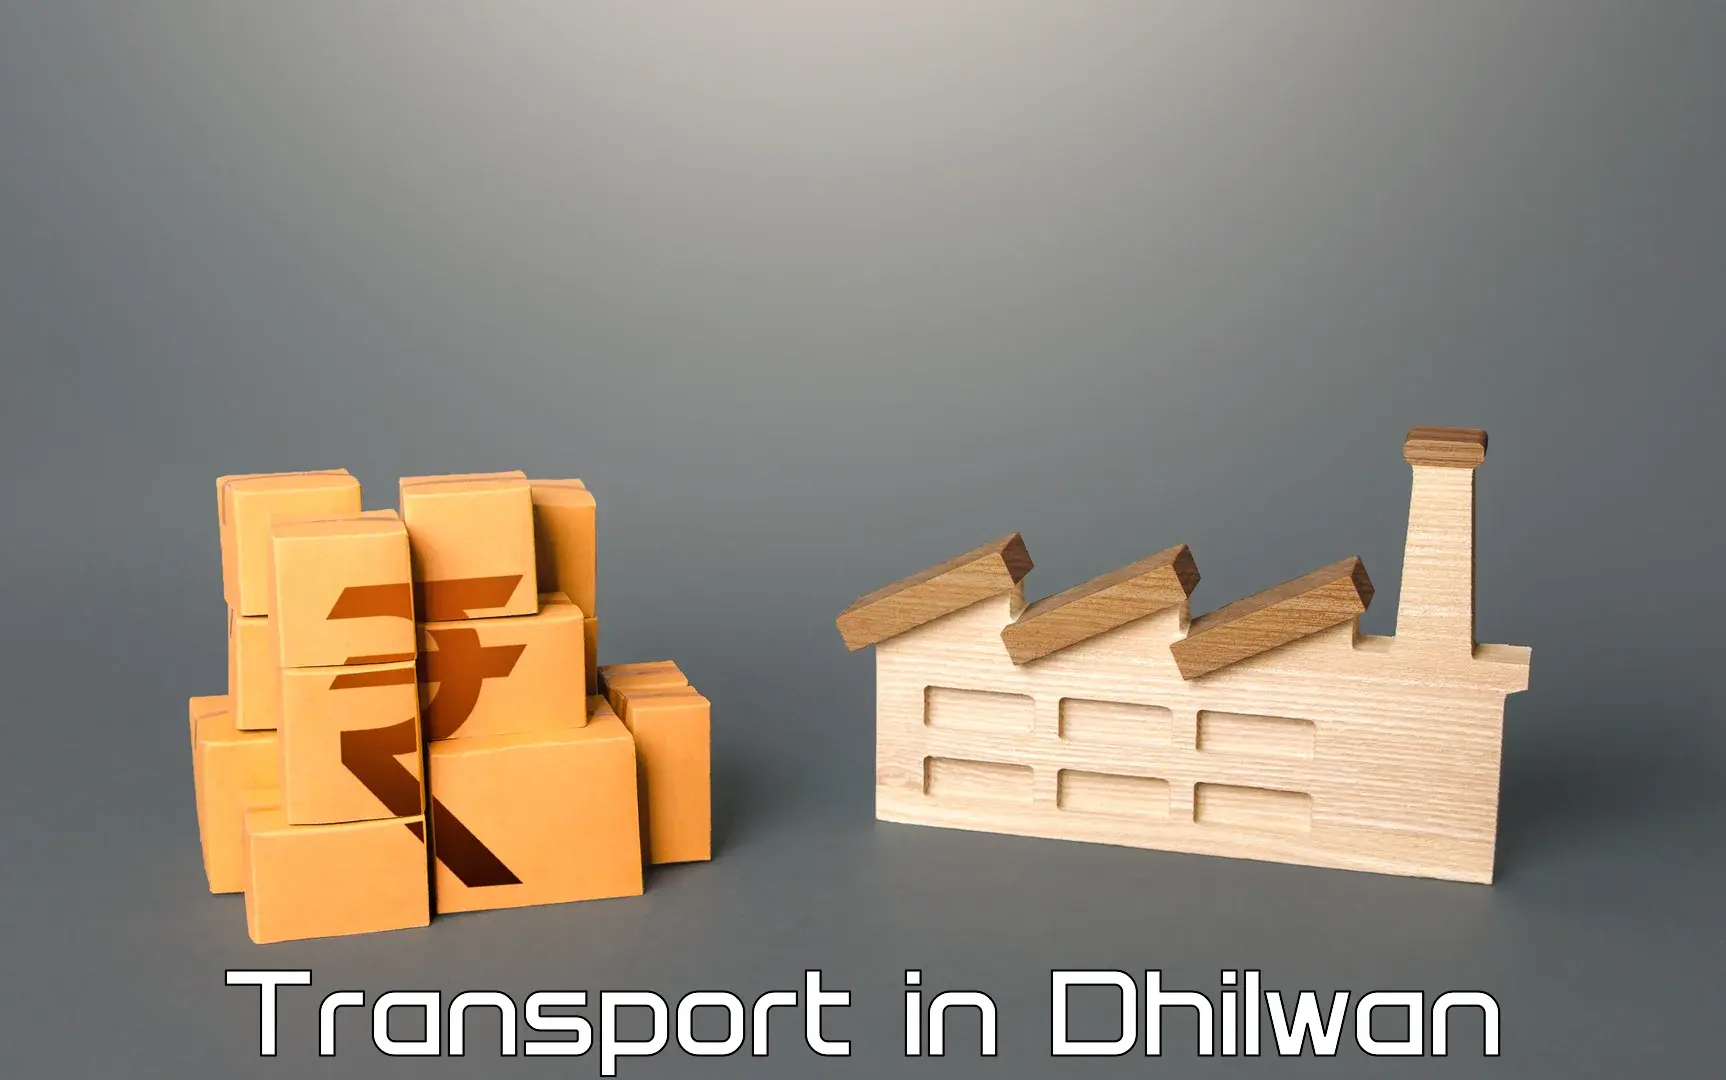 Cargo transportation services in Dhilwan